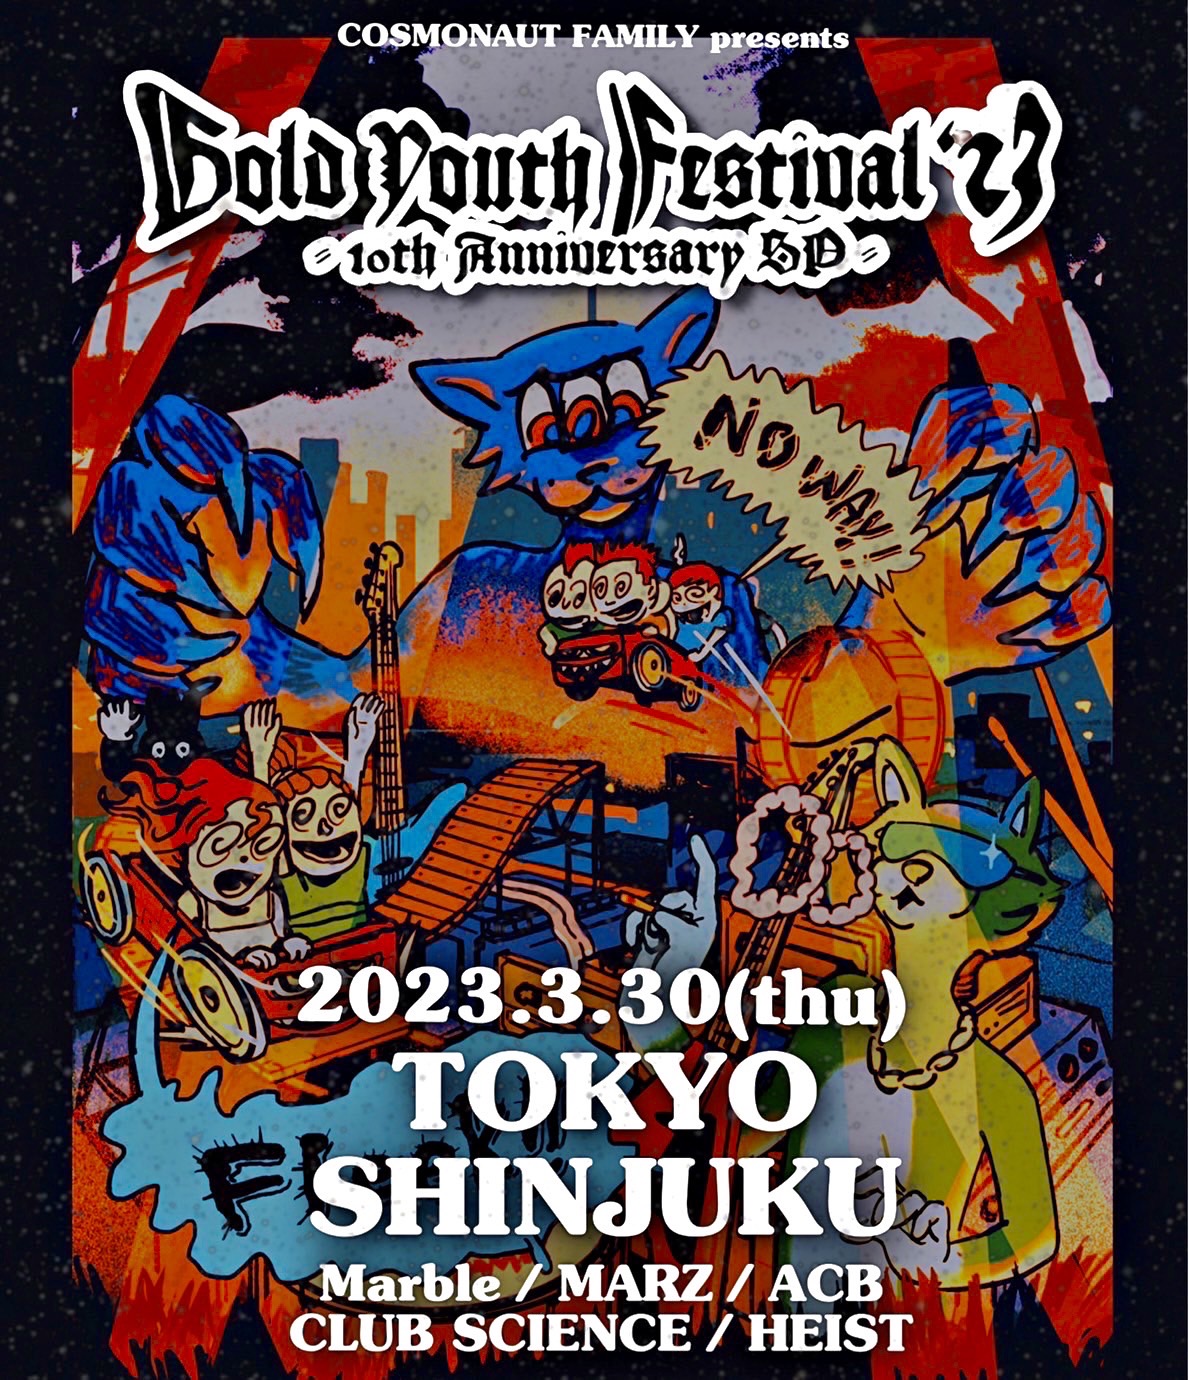 GOLD YOUTH FESTIVAL 2023 -Gold Youth 10th Anniversary SP-